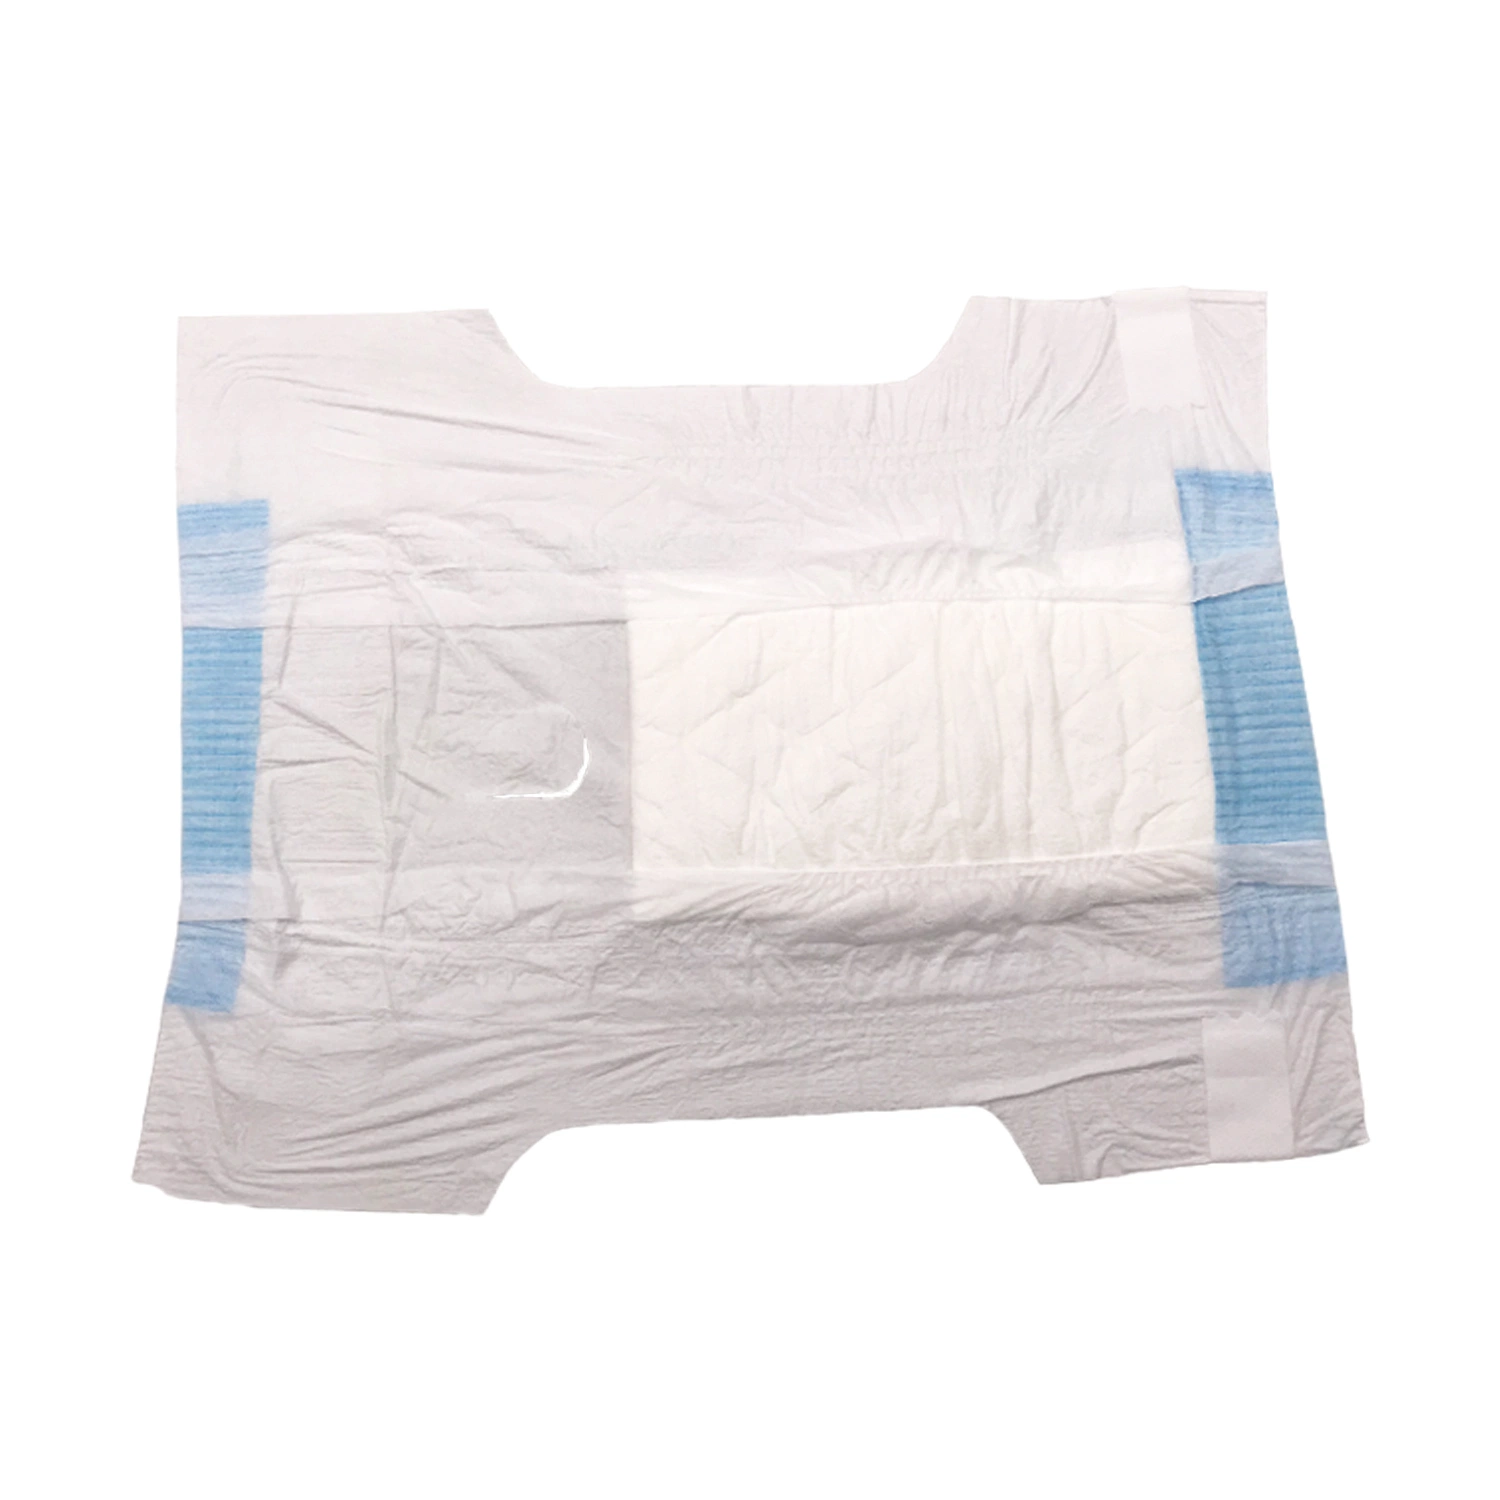 Dog Diaper Pet Dog Diaper Disposable for Dog for Cat